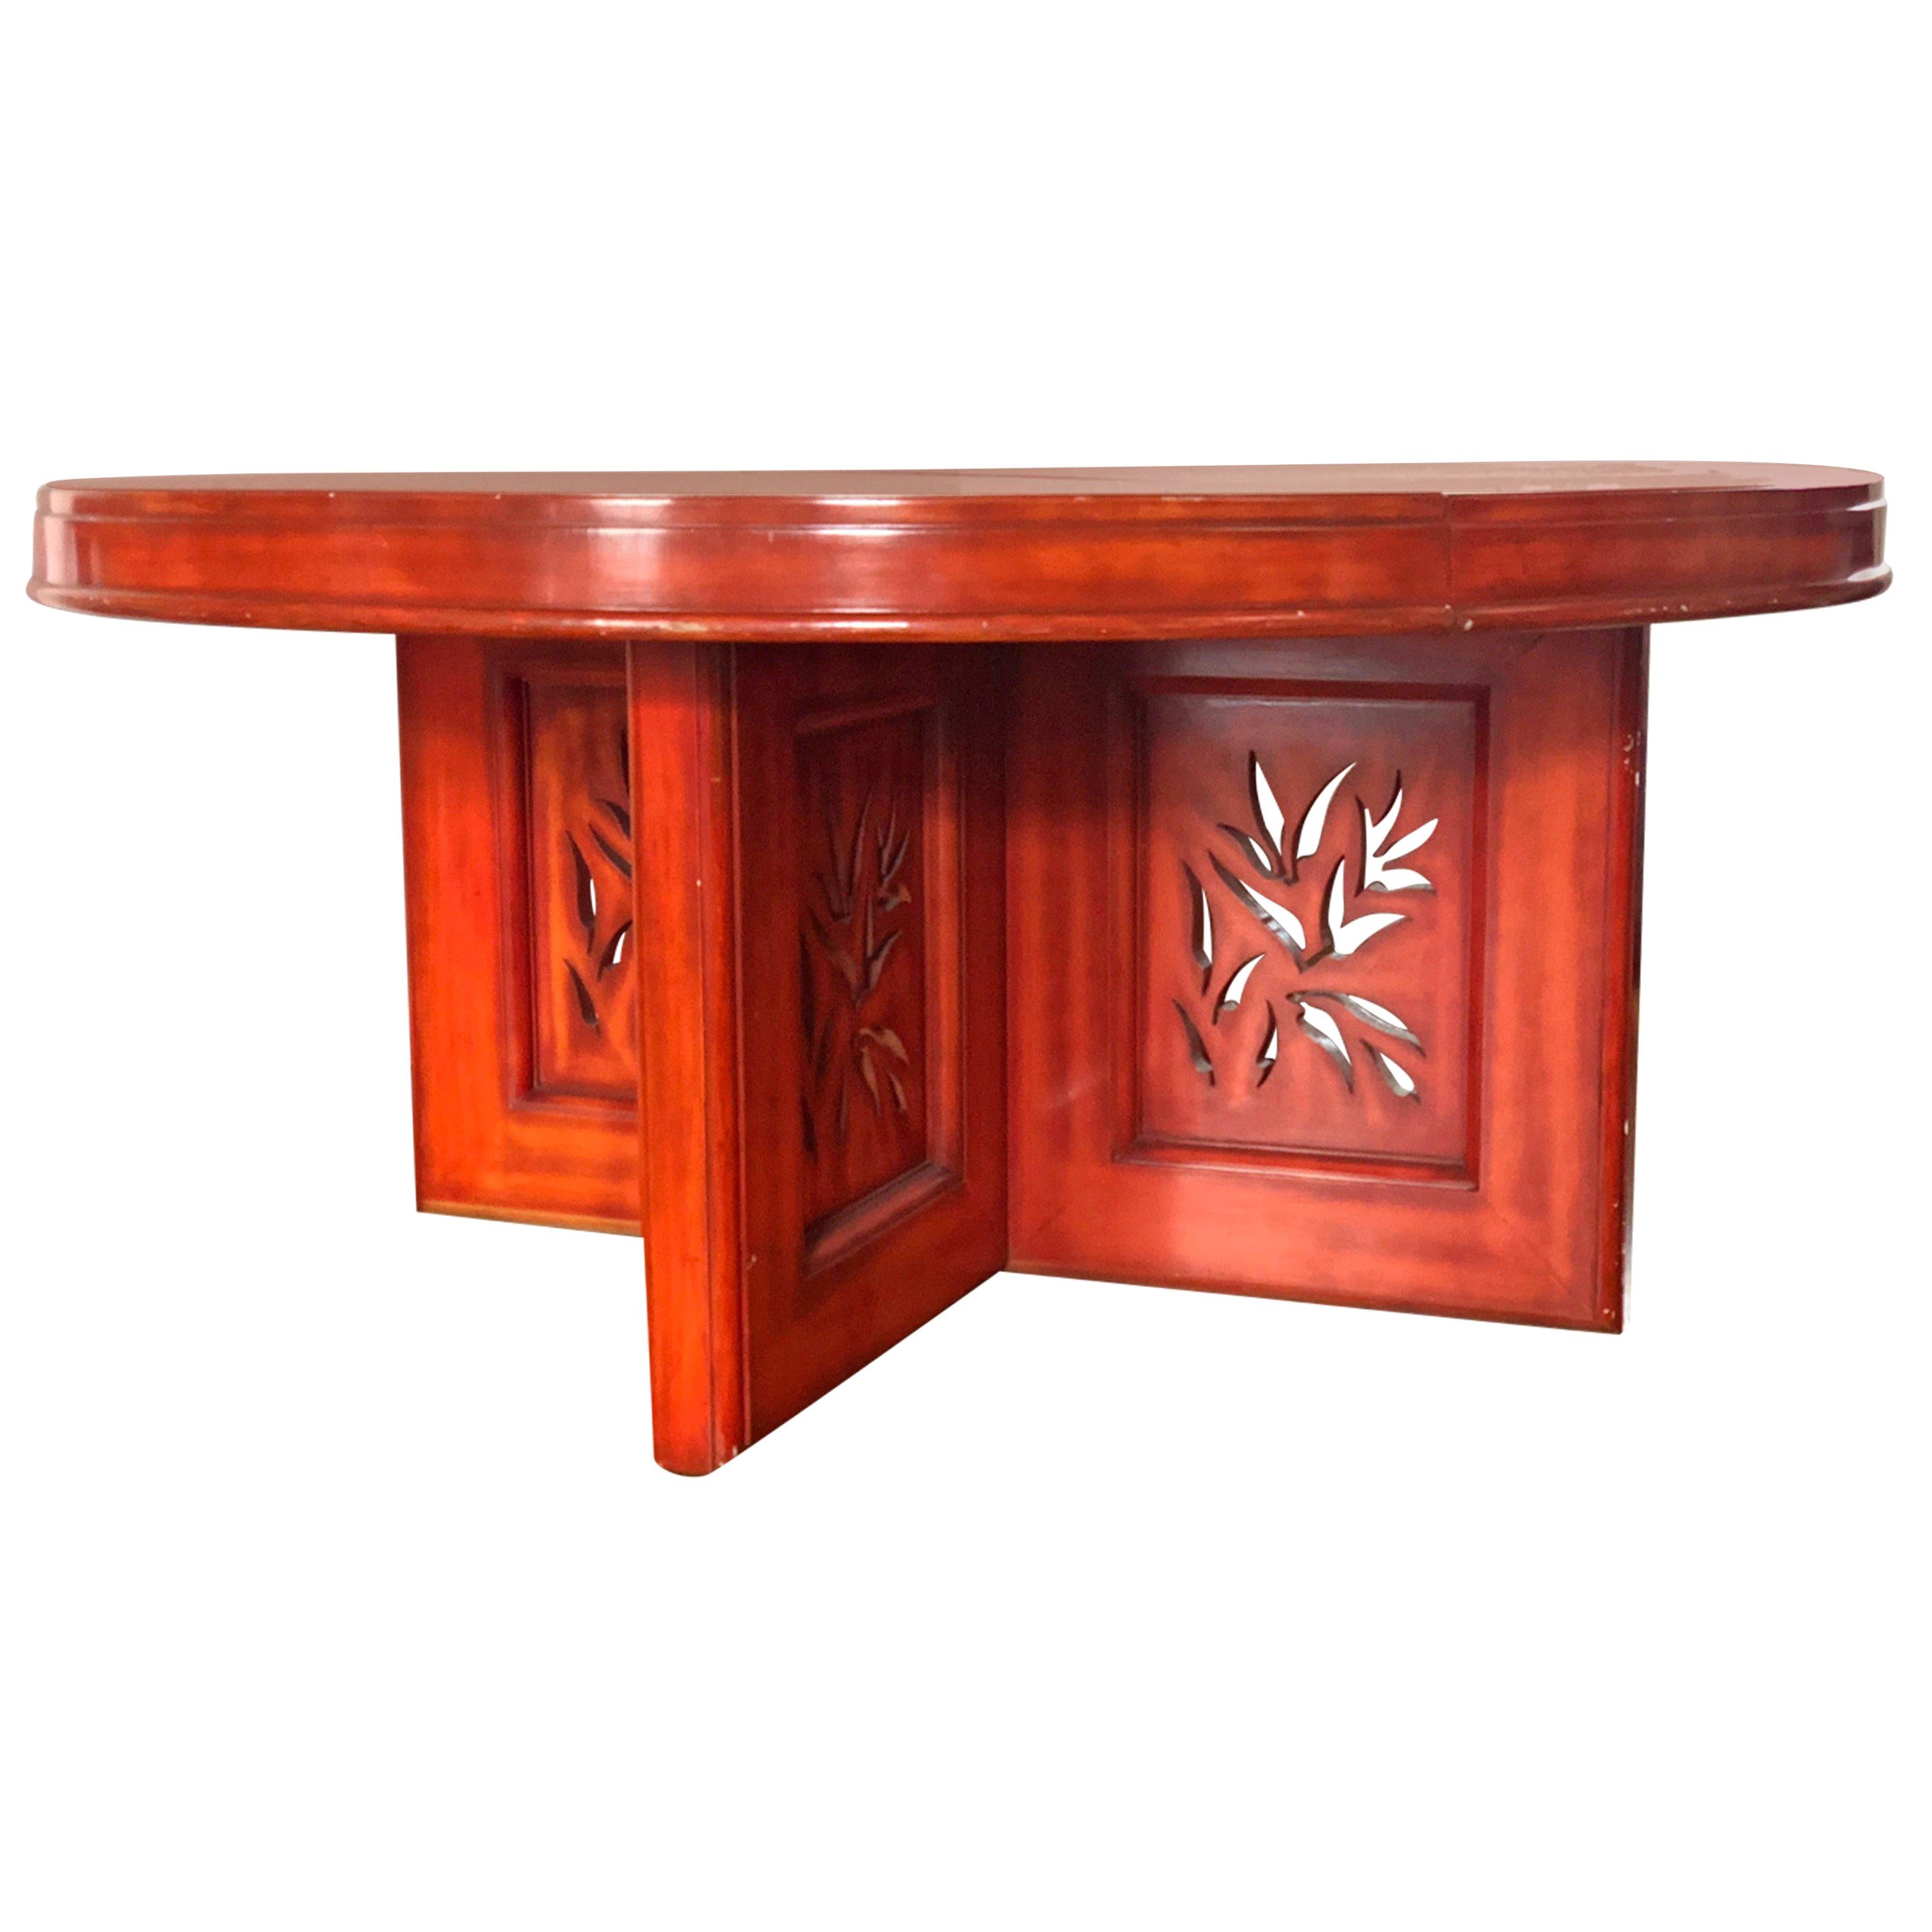 James Mont 'Flame' Cinnabar Lacquered Chinoiserie Dining Table, 1952